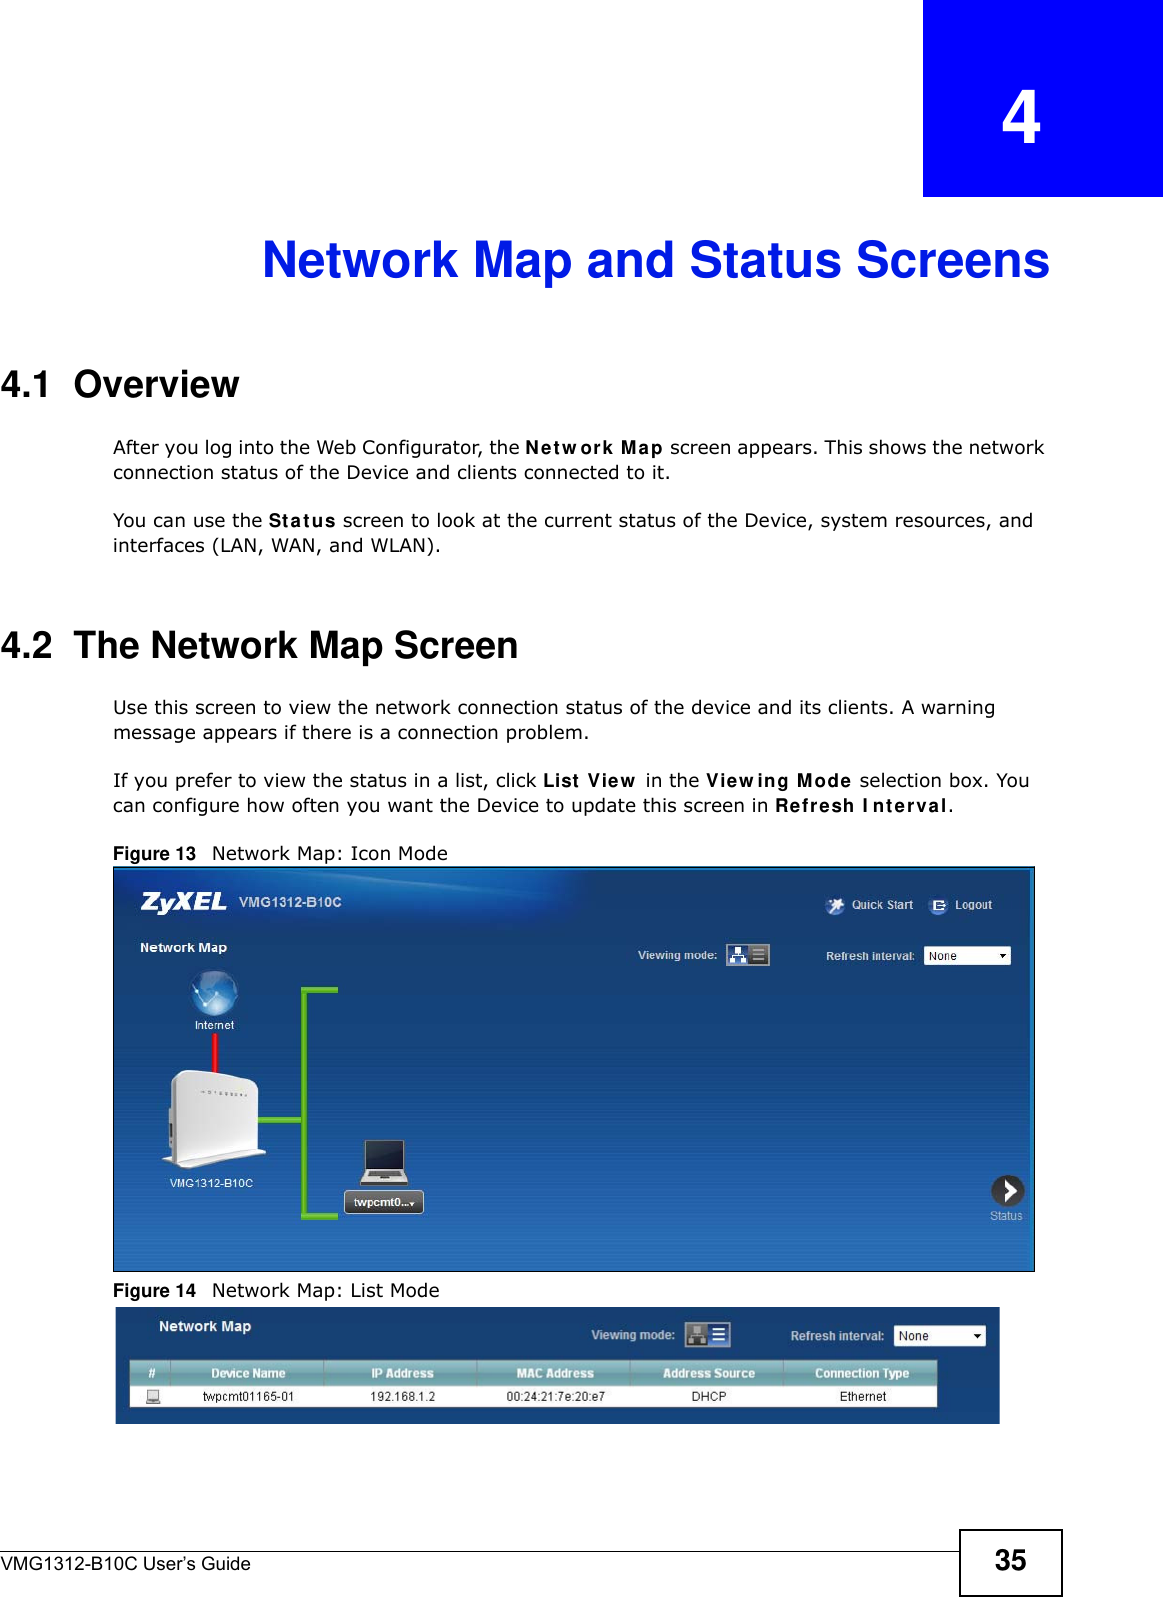 VMG1312-B10C User’s Guide 35CHAPTER   4Network Map and Status Screens4.1  OverviewAfter you log into the Web Configurator, the N et w or k M a p screen appears. This shows the network connection status of the Device and clients connected to it. You can use the St a t u s screen to look at the current status of the Device, system resources, and interfaces (LAN, WAN, and WLAN). 4.2  The Network Map ScreenUse this screen to view the network connection status of the device and its clients. A warning message appears if there is a connection problem. If you prefer to view the status in a list, click List  View  in the View in g M ode  selection box. You can configure how often you want the Device to update this screen in Refresh I nt erval.Figure 13   Network Map: Icon Mode Figure 14   Network Map: List Mode